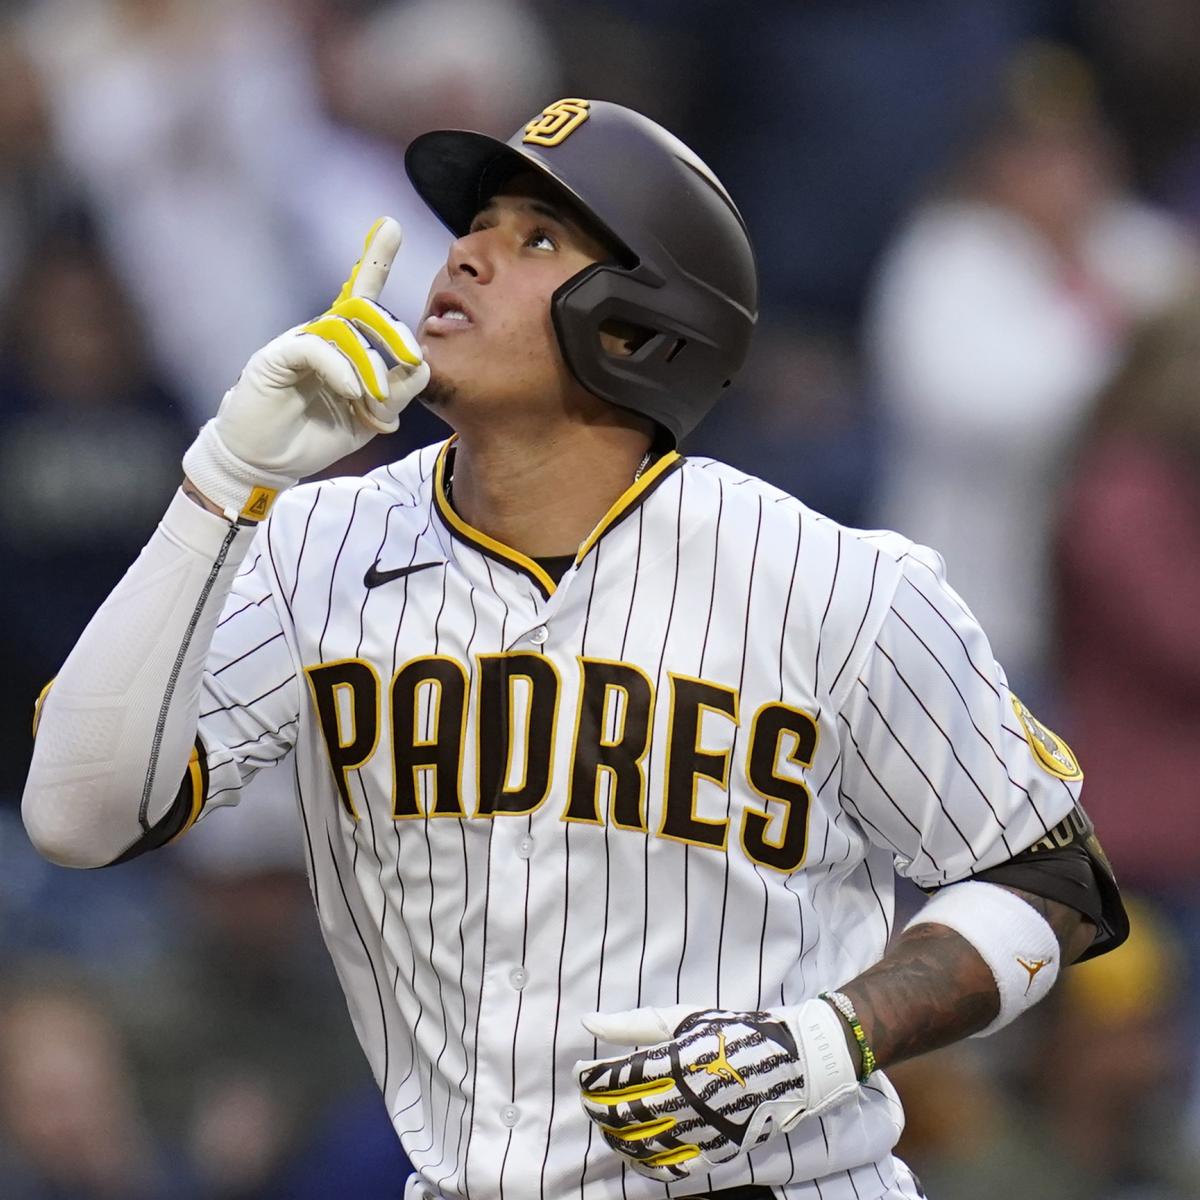 How long are current Padres under contract with the team?